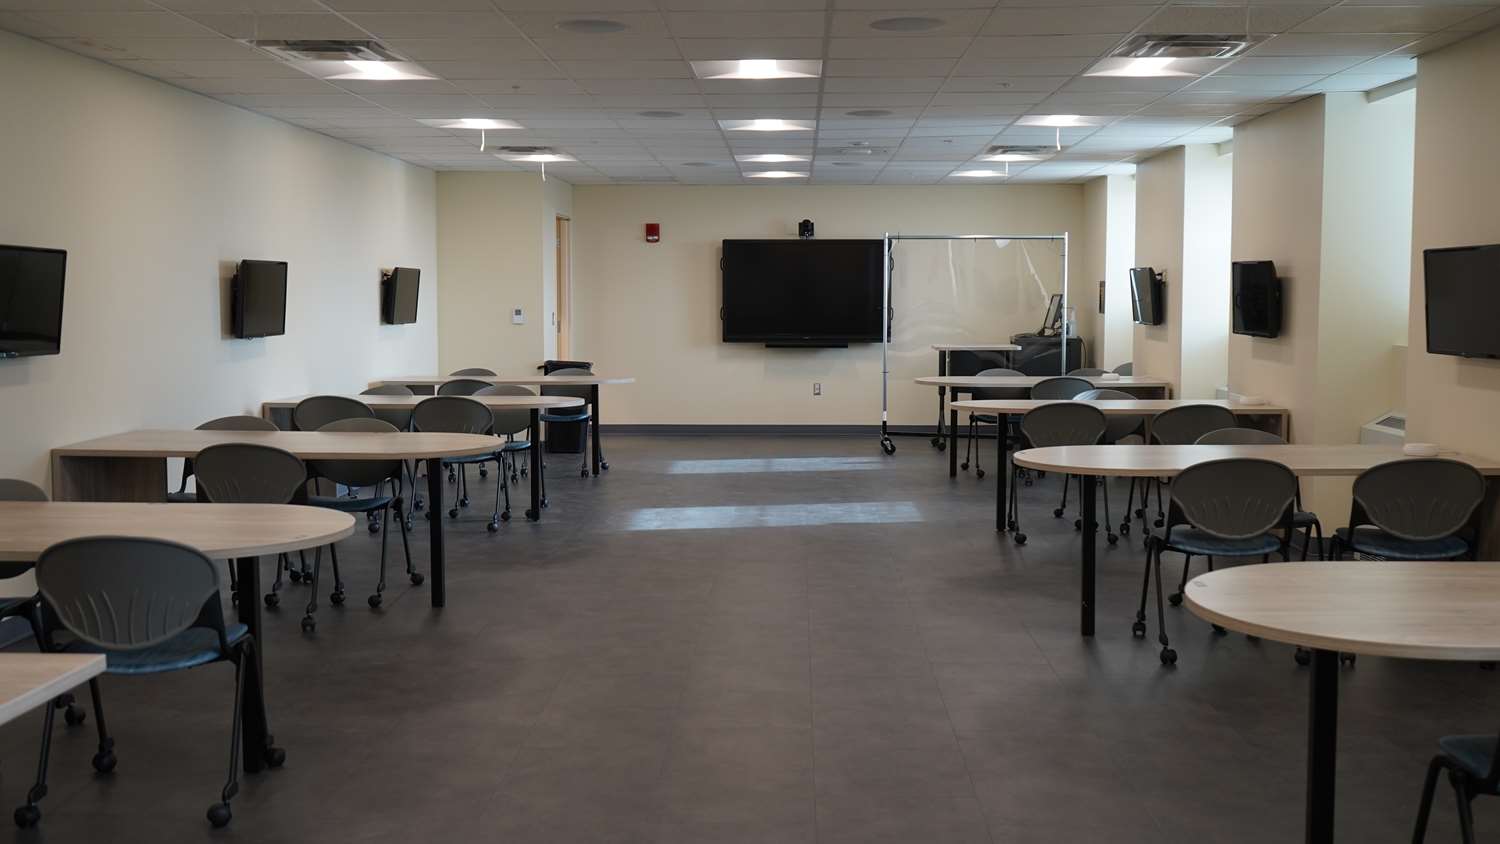 Empty classroom with table, chairs and monitors on the wall.